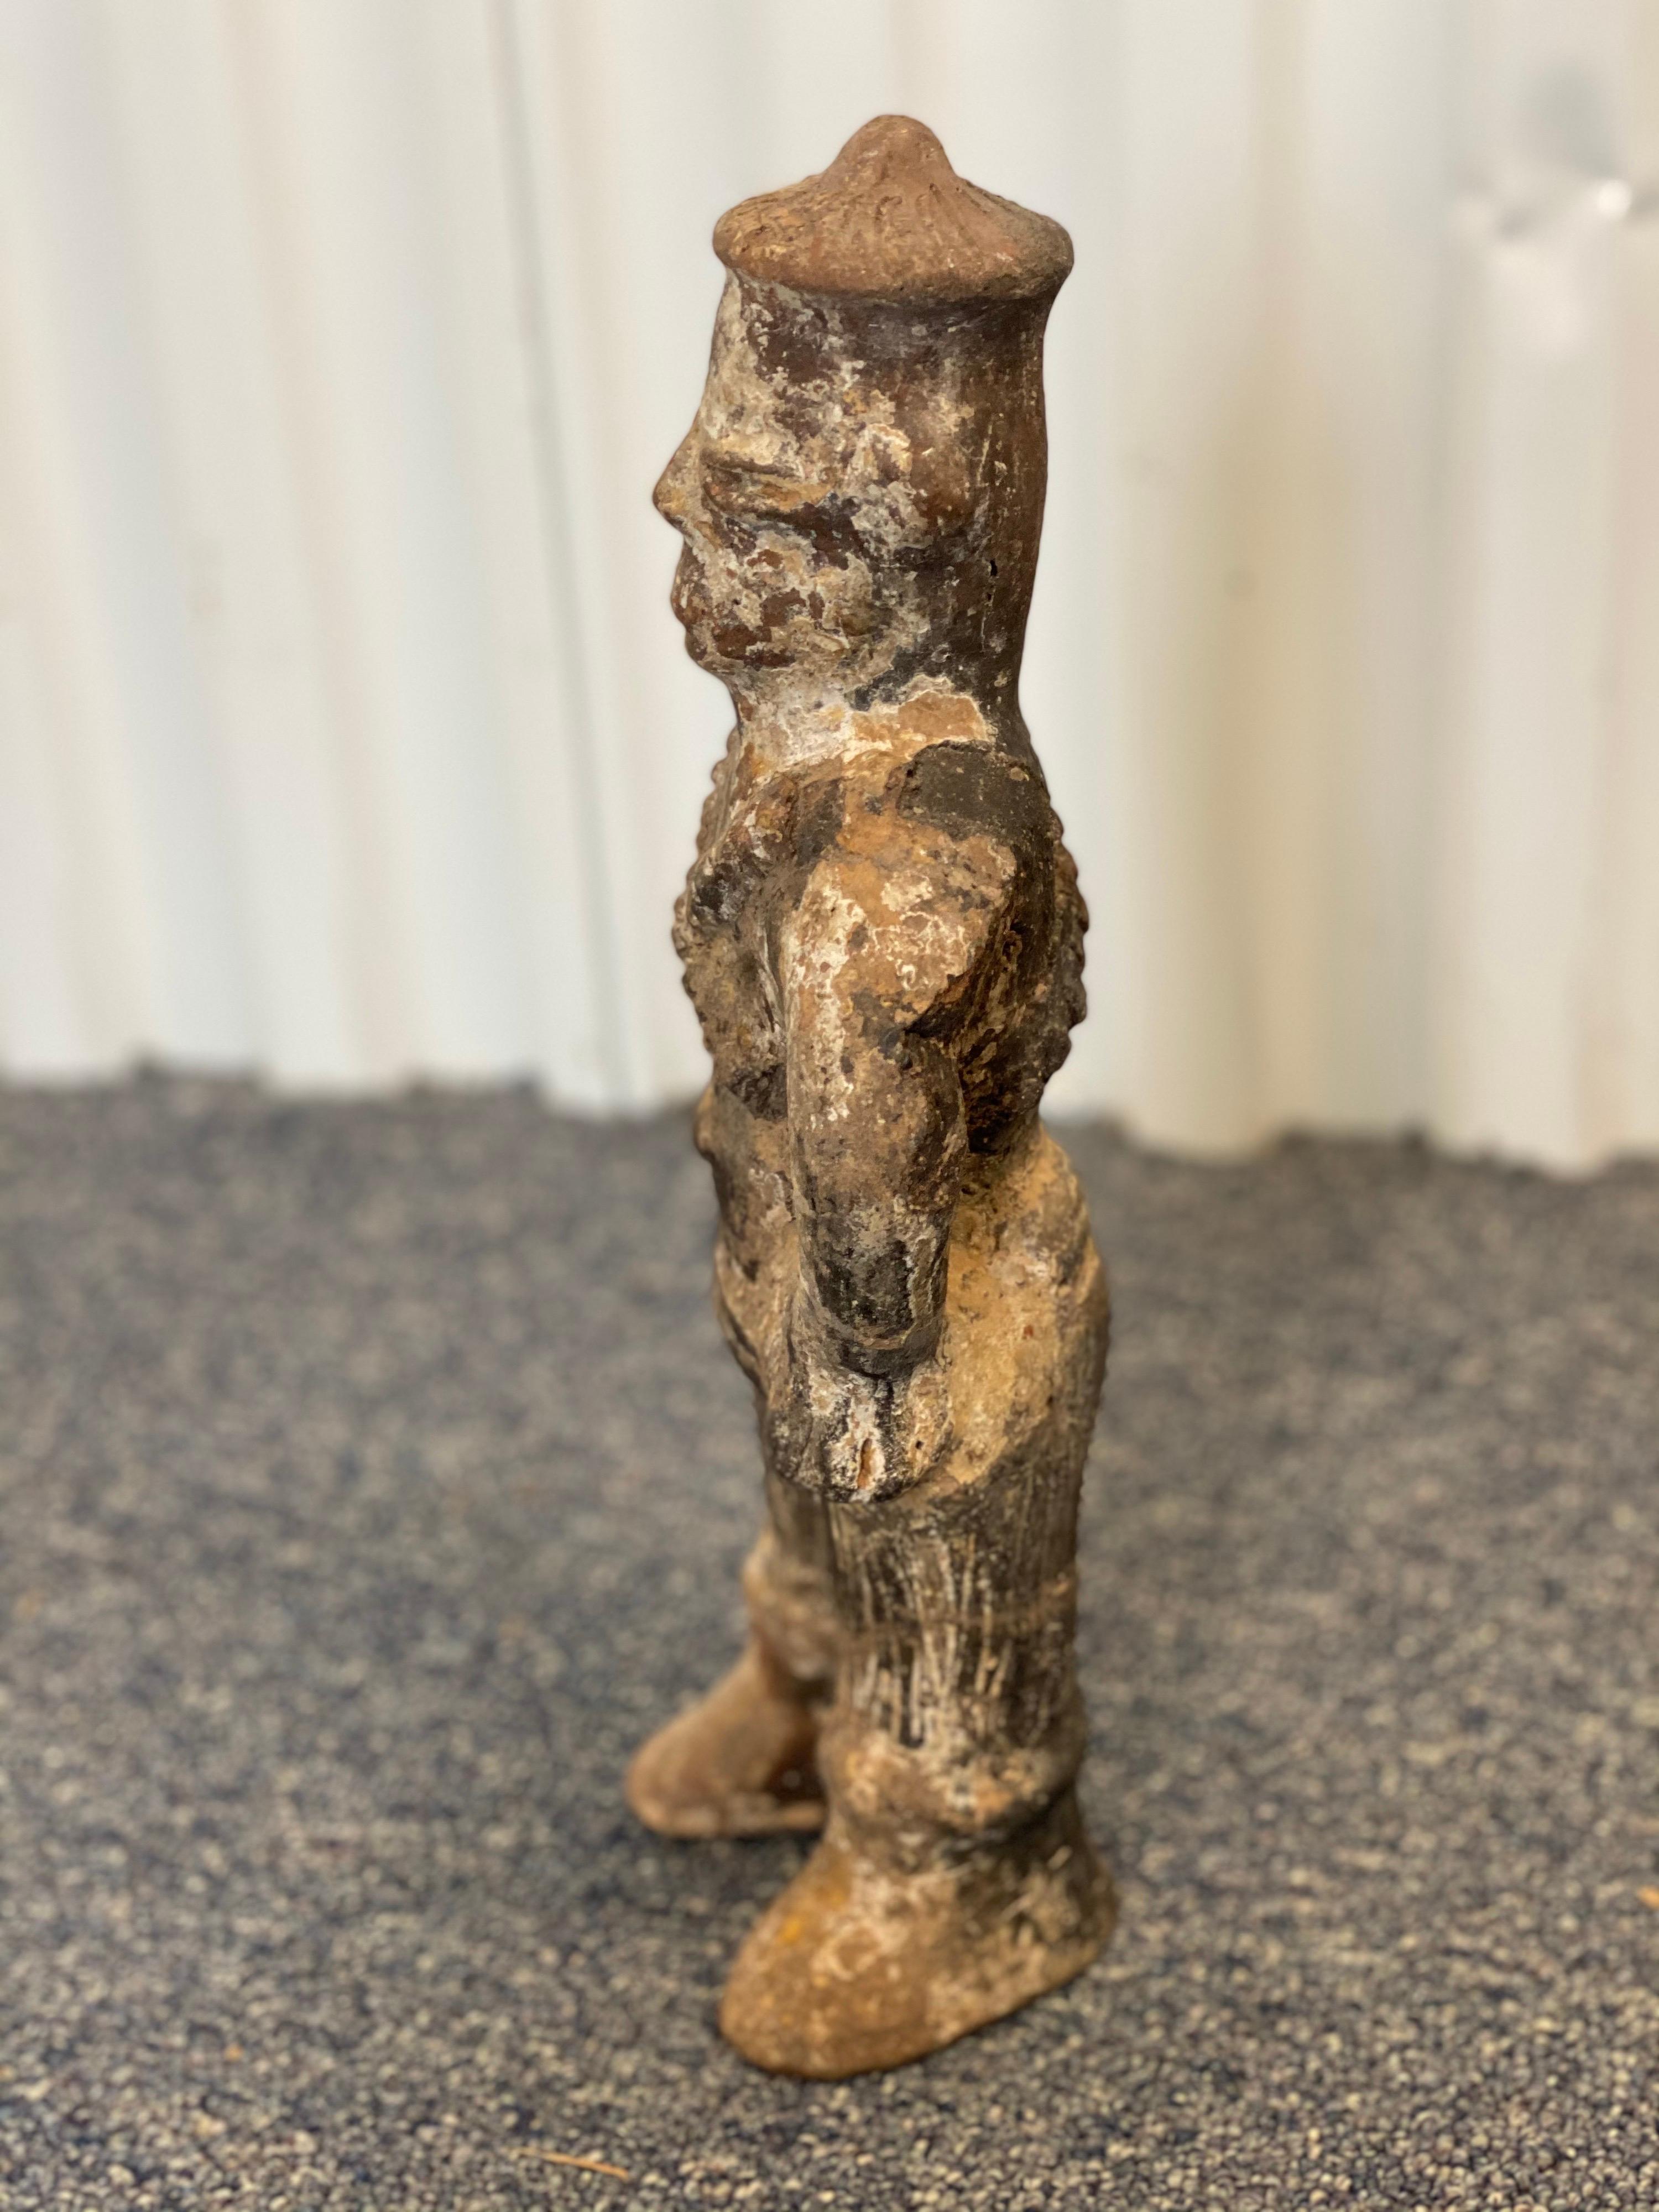 19th century Chinese carved figure. While this sculpture may be small it isn't lacking in its attention to detail.
Across the chest of the figure you cans see two overlapping carved out slings or belts that drape both the front and back in an